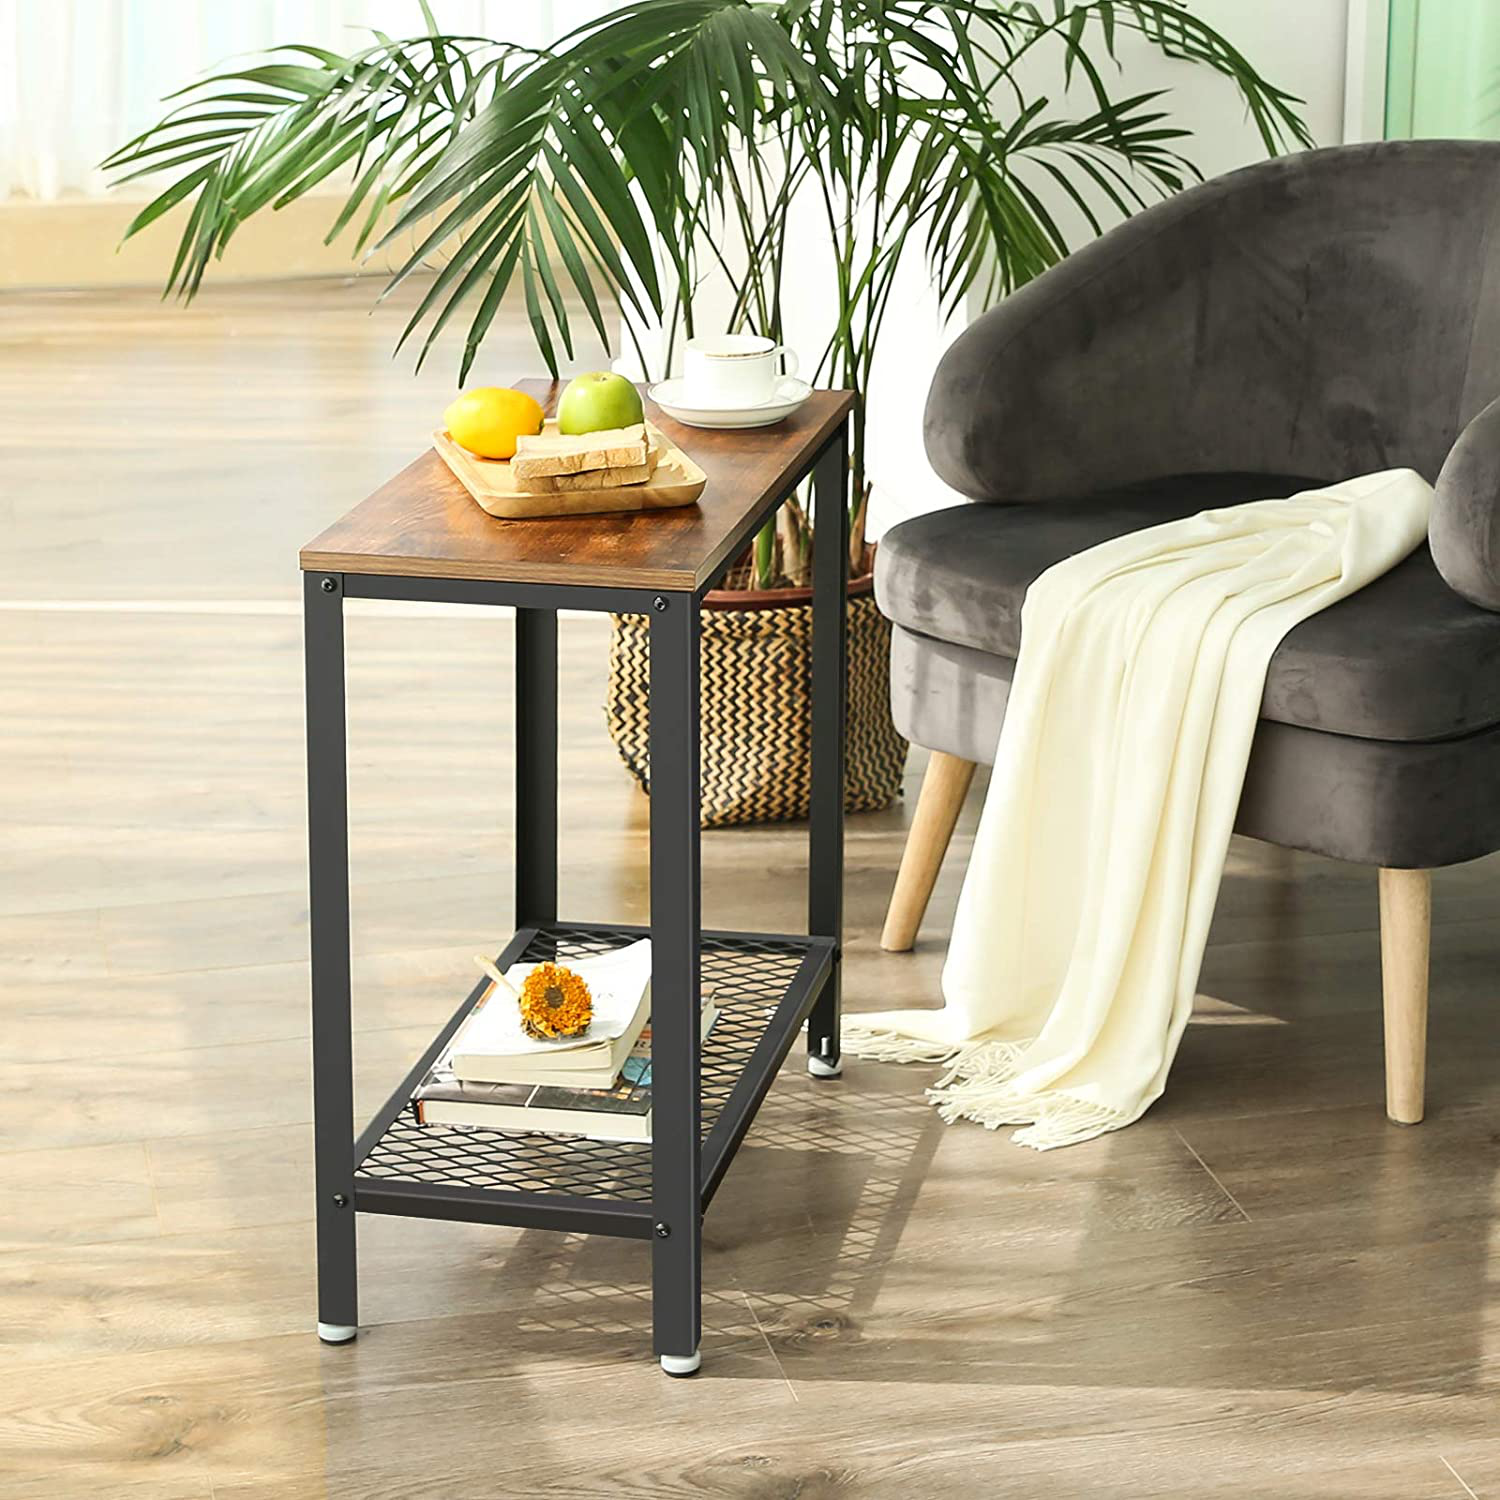 Rena Side Table, End Table, Bedside Table With Mesh Shelf